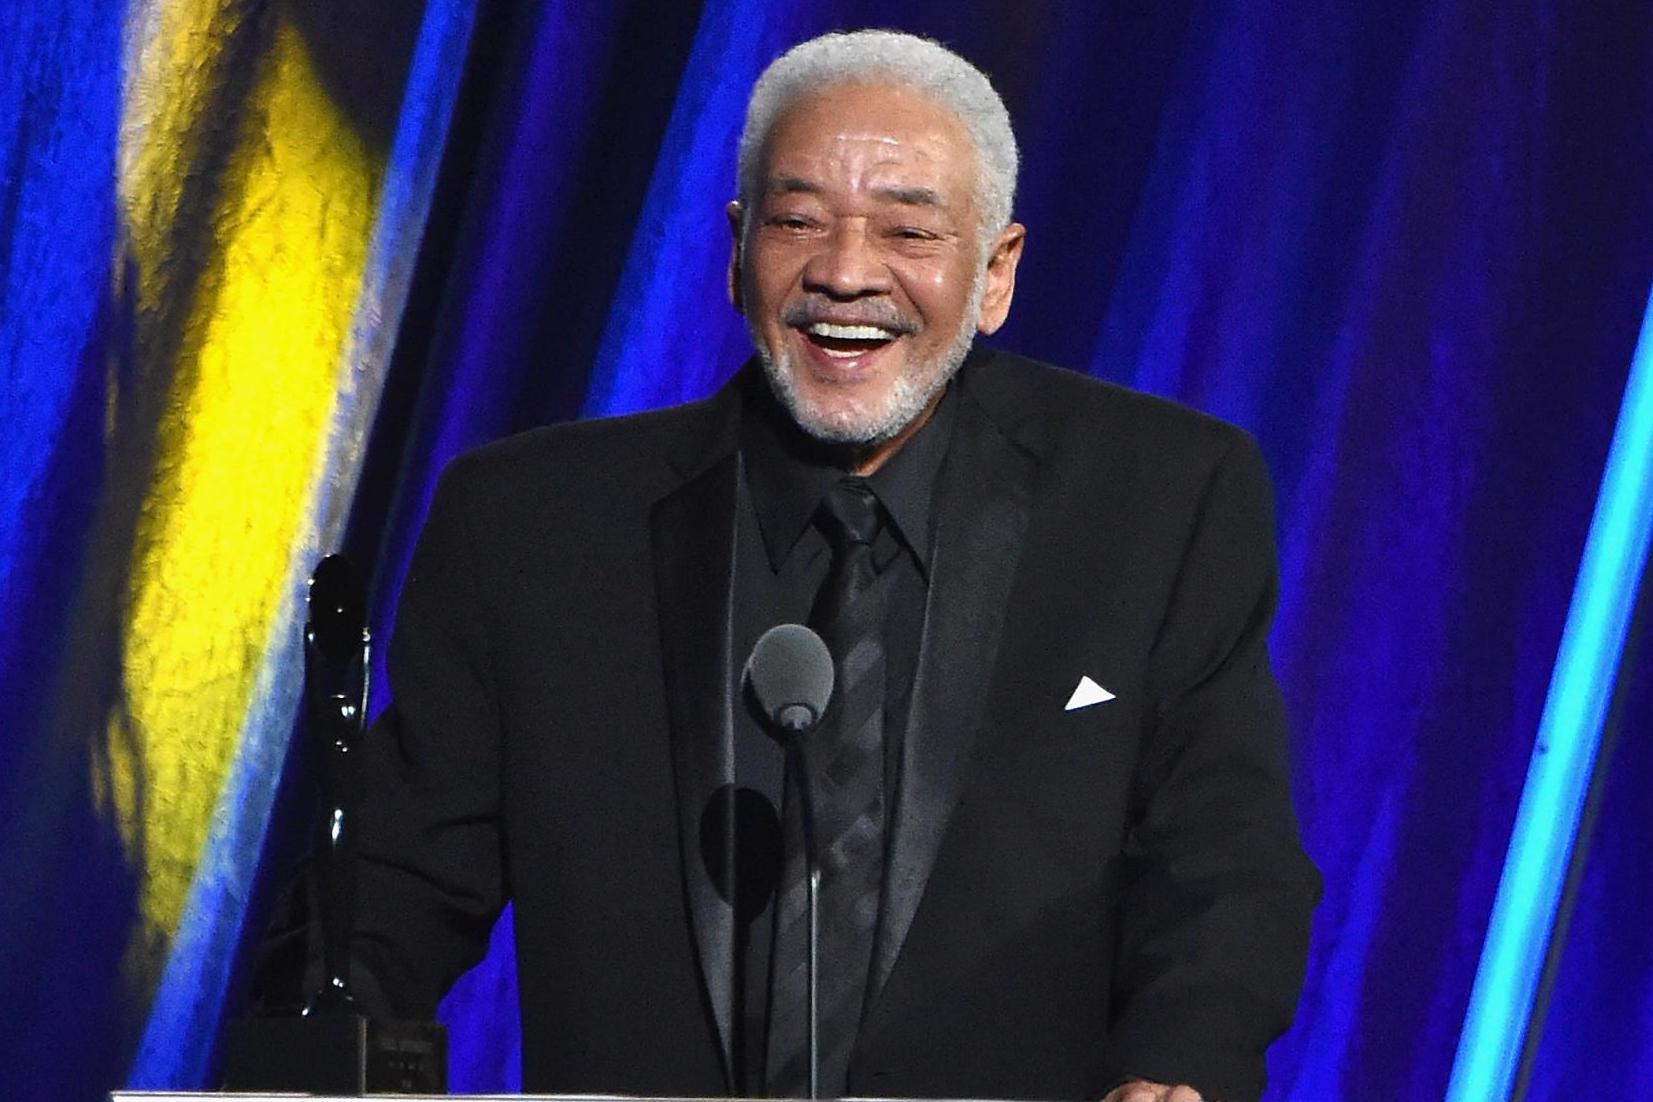 Bill Withers: Artist's iconic New Yorker interview resurfaces after death